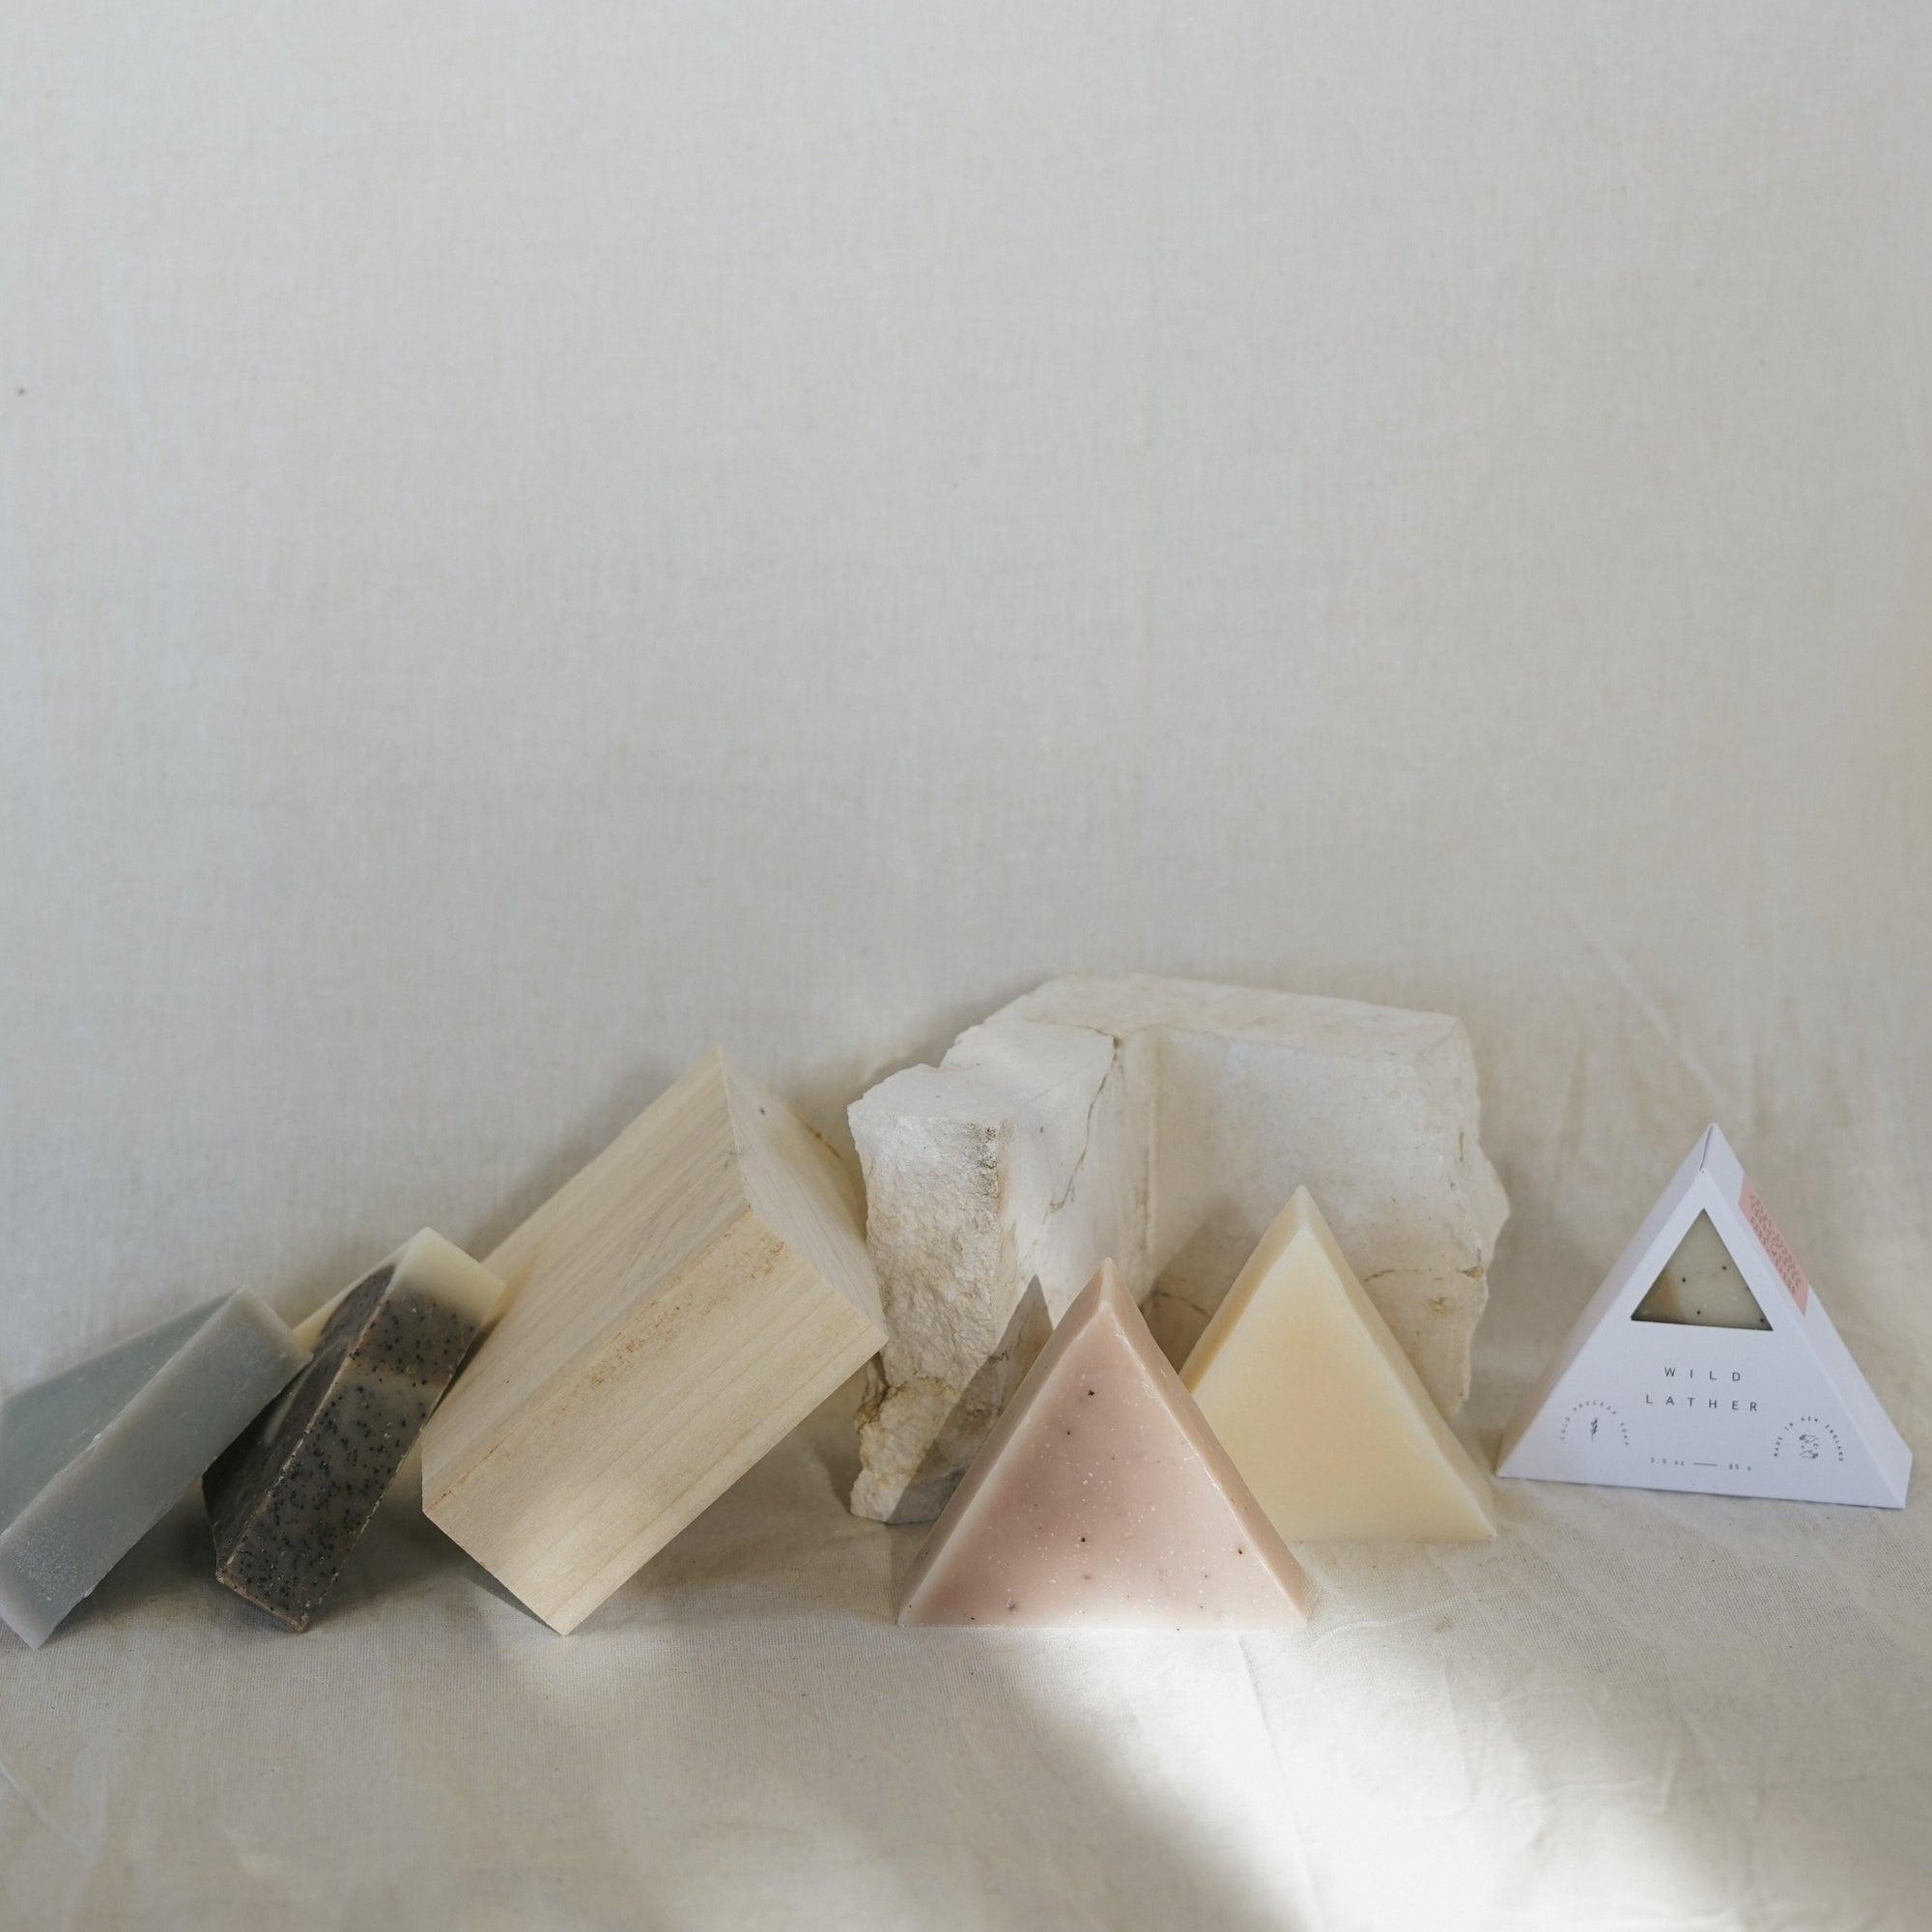 Five triangle soaps leaning against wood and stone